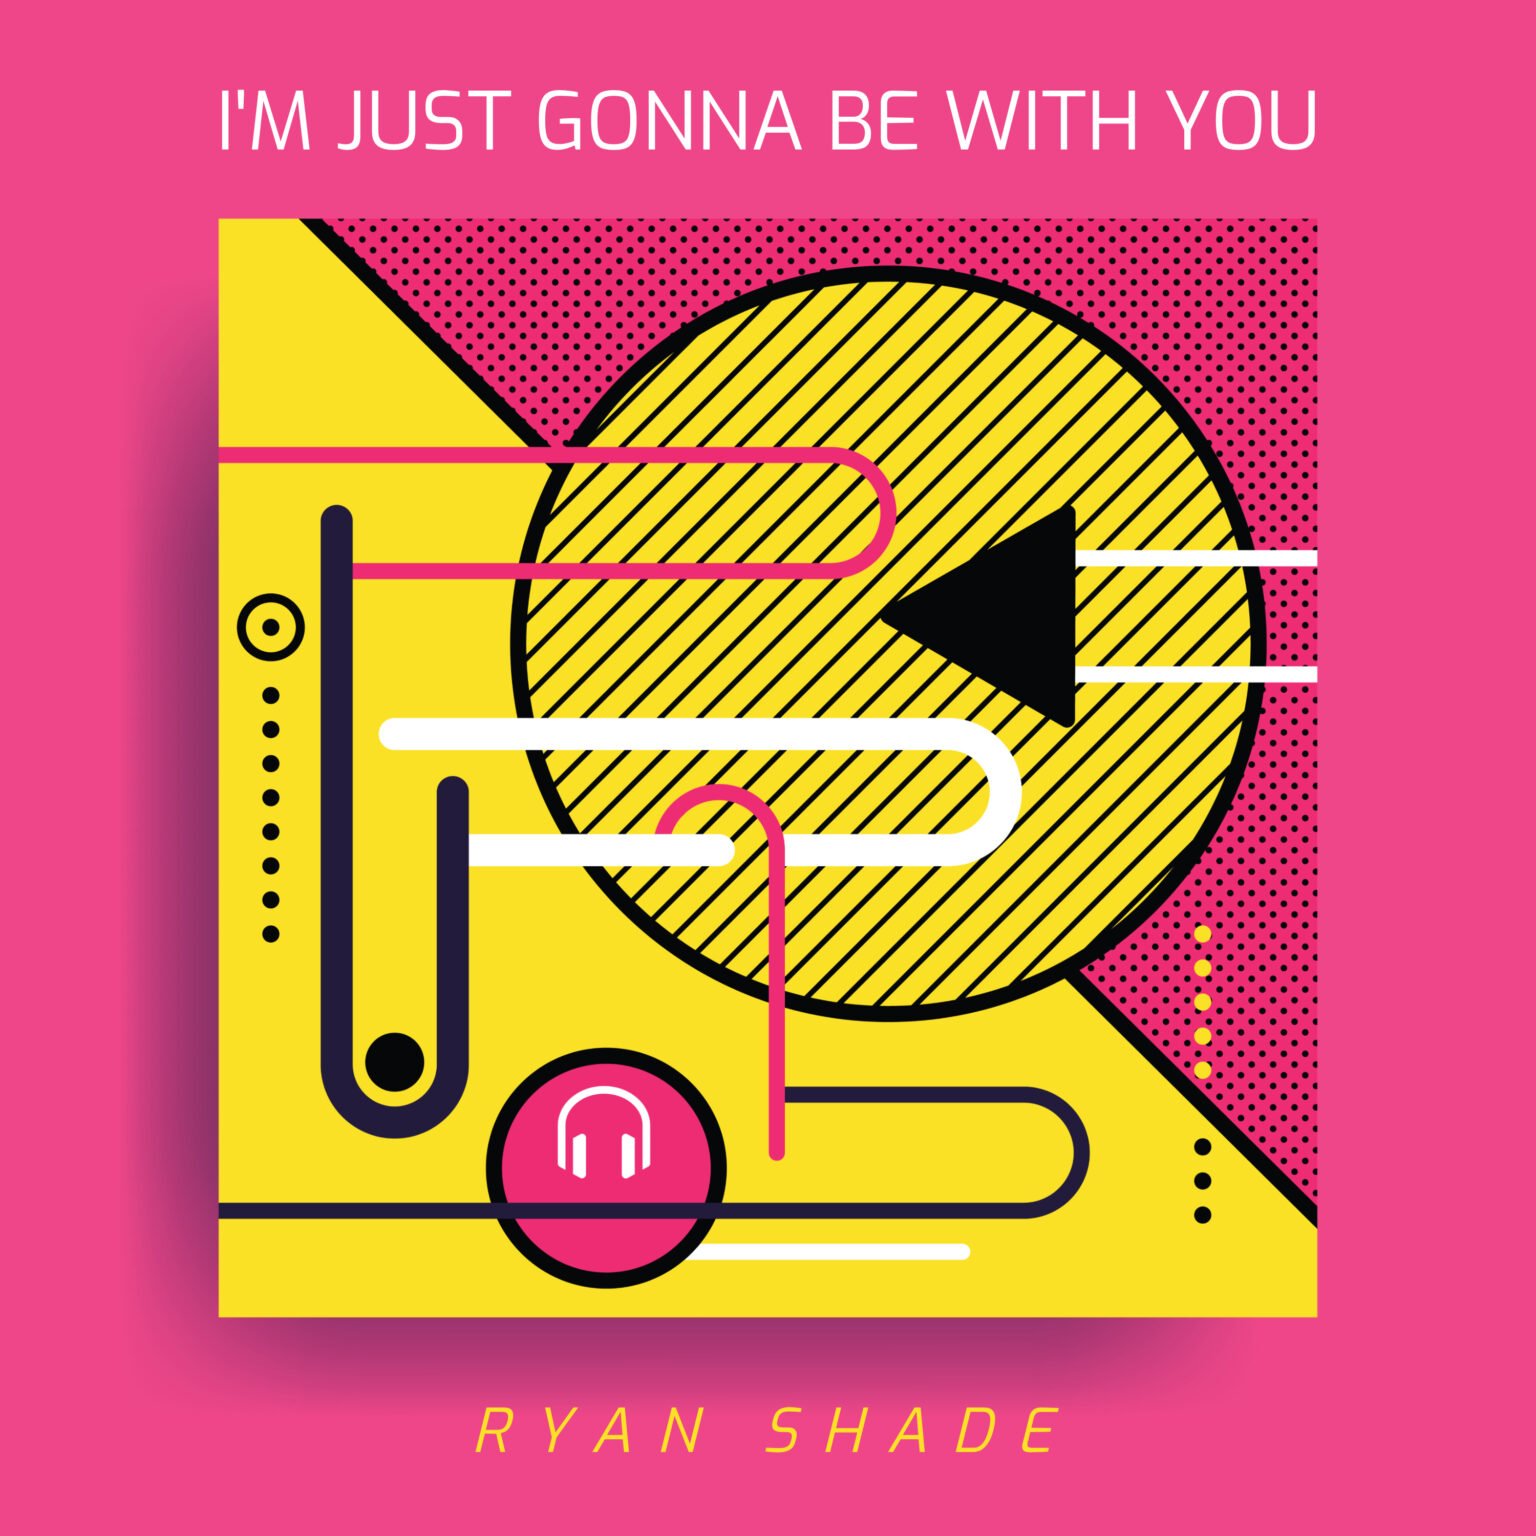 Ryan Shade - I'm Just Gonna Be with You